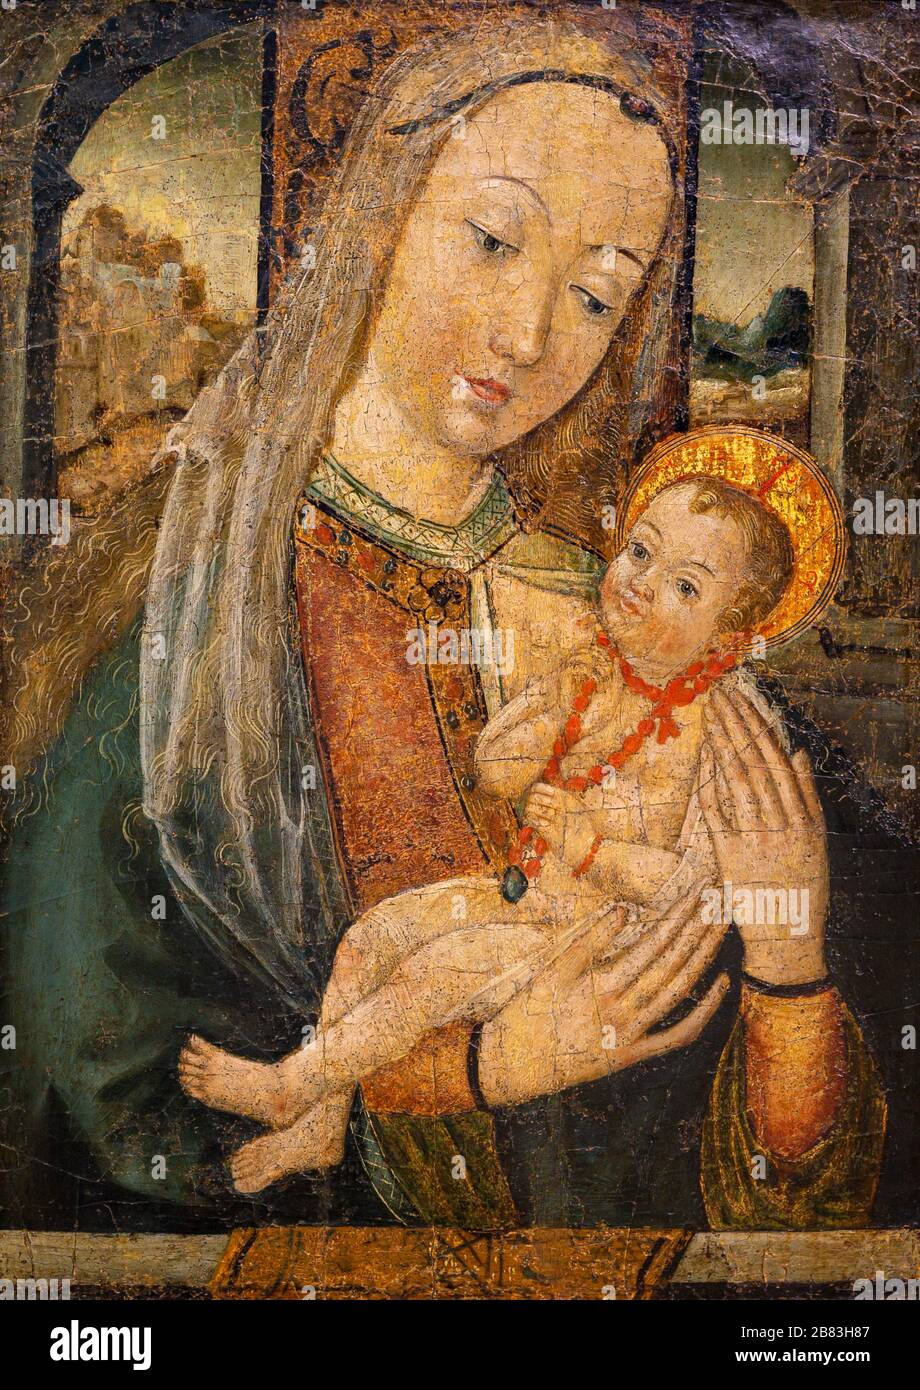 Virgin Mary with Infant Jesus. End of the 15th century. By a Central European sculptor trained in Northern Italy. Bratislava City Gallery. Stock Photo